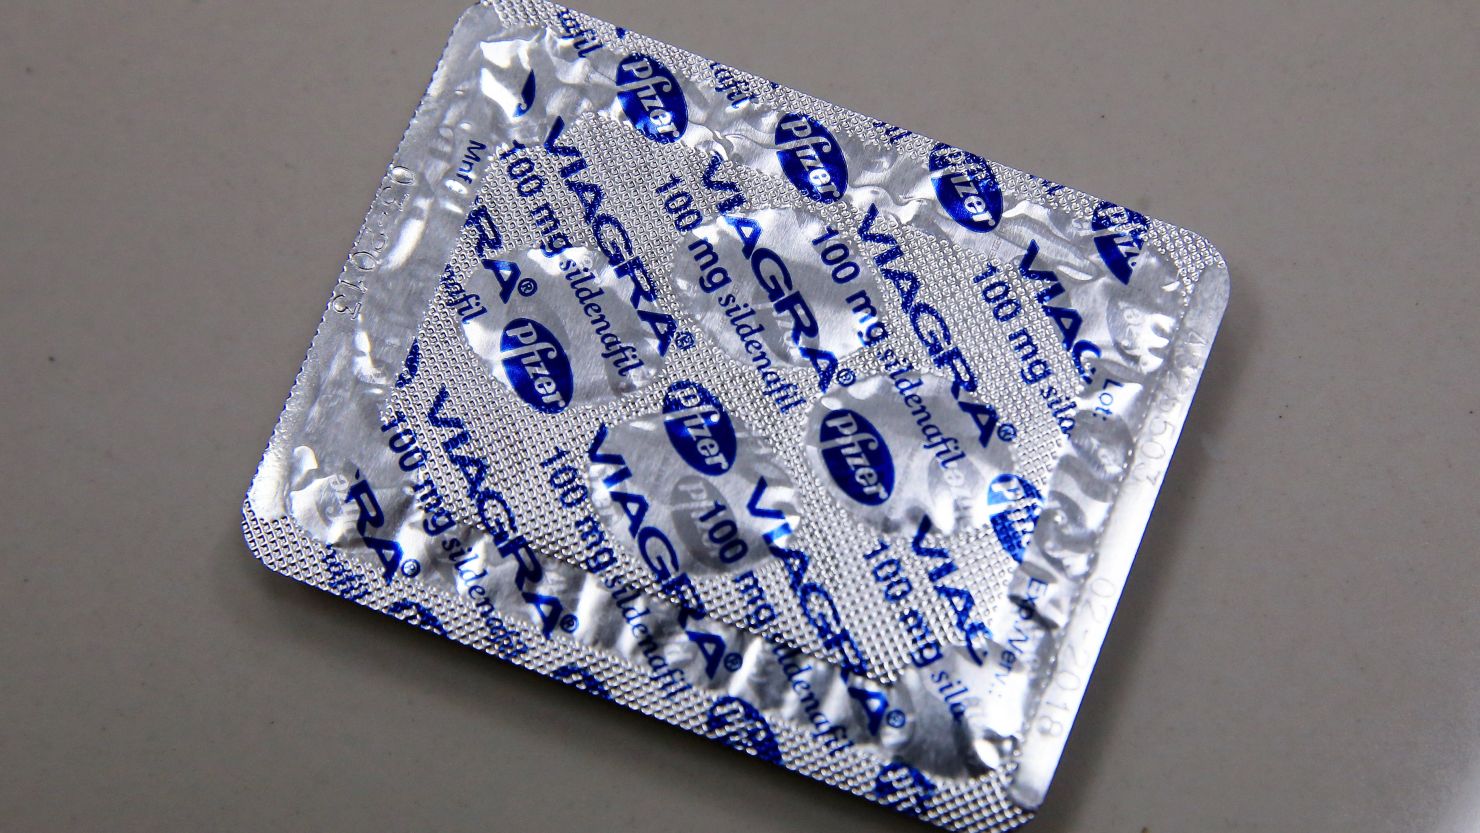 Chinese authorities found Sildenafil, the active ingredient in Viagra, in 69 alcoholic products. 